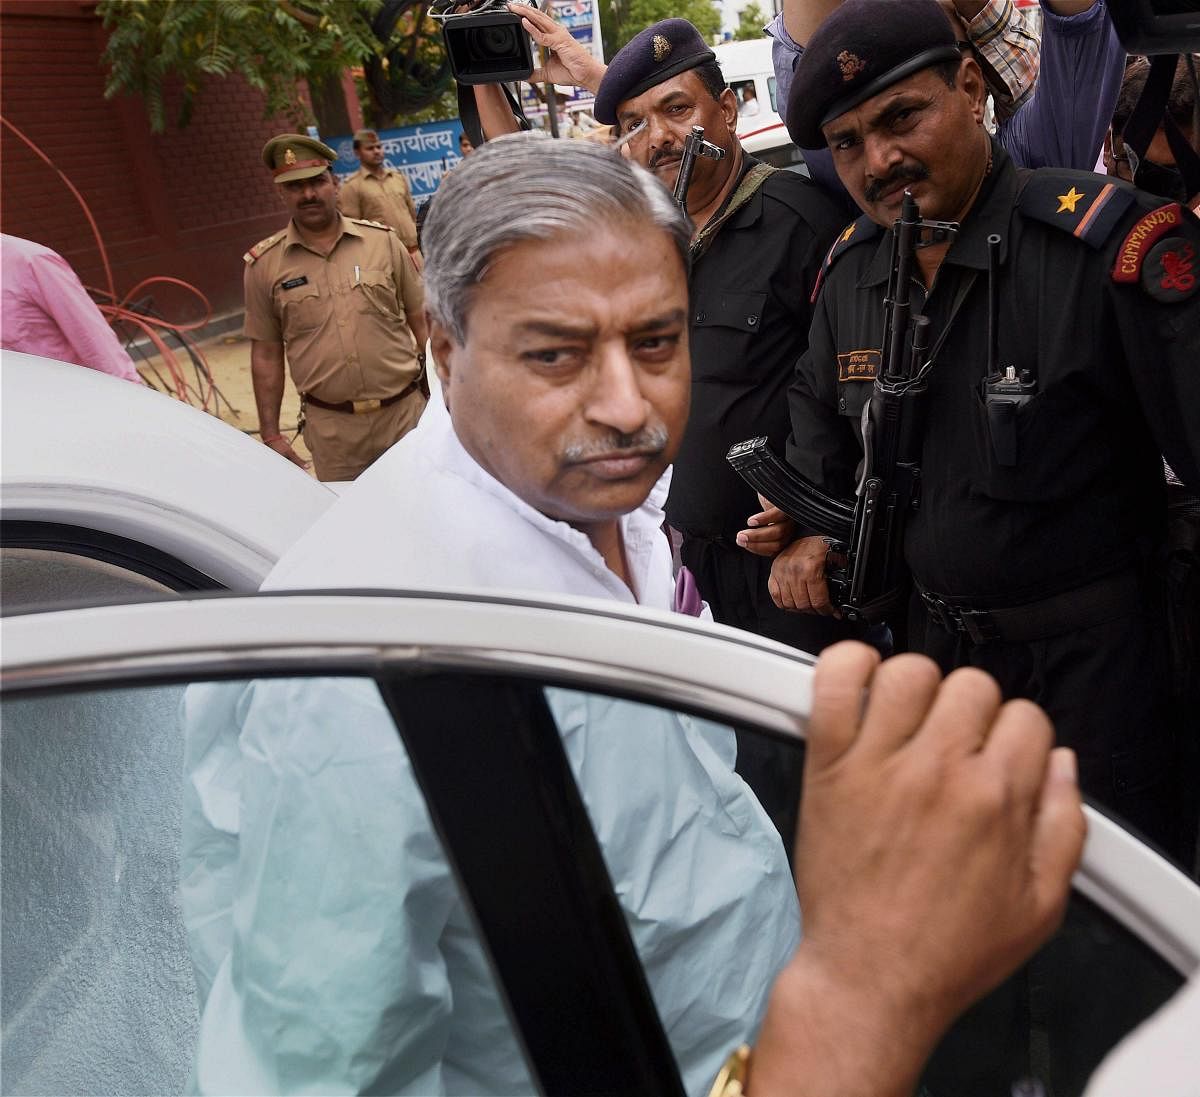 Vinay Katiyar | Founder-President of right-wing group Bajrang Dal, Vinay Katiyar has also been acquitted in the case. Credit: PTI